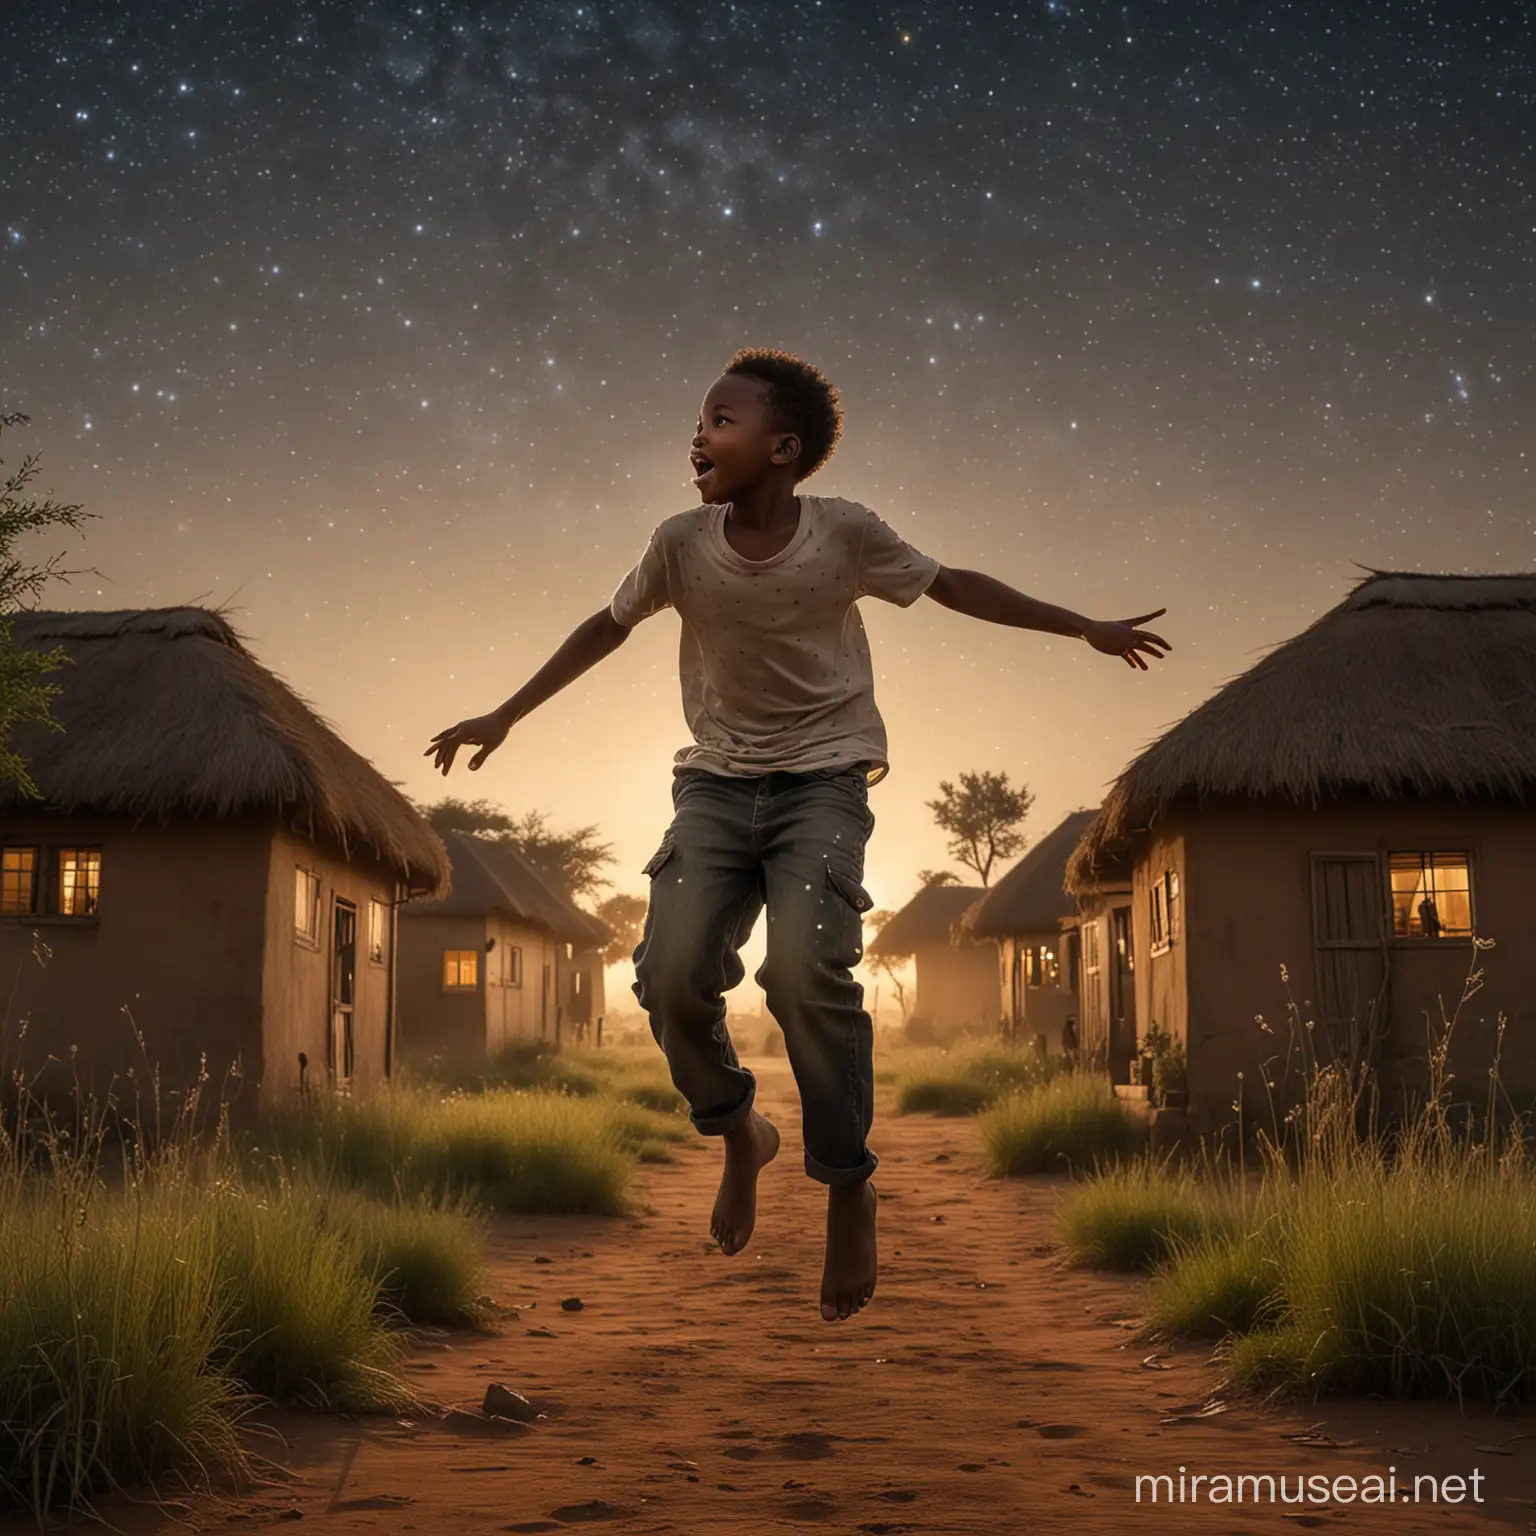 Energetic African Boy Jumping Against Starlit Village Background